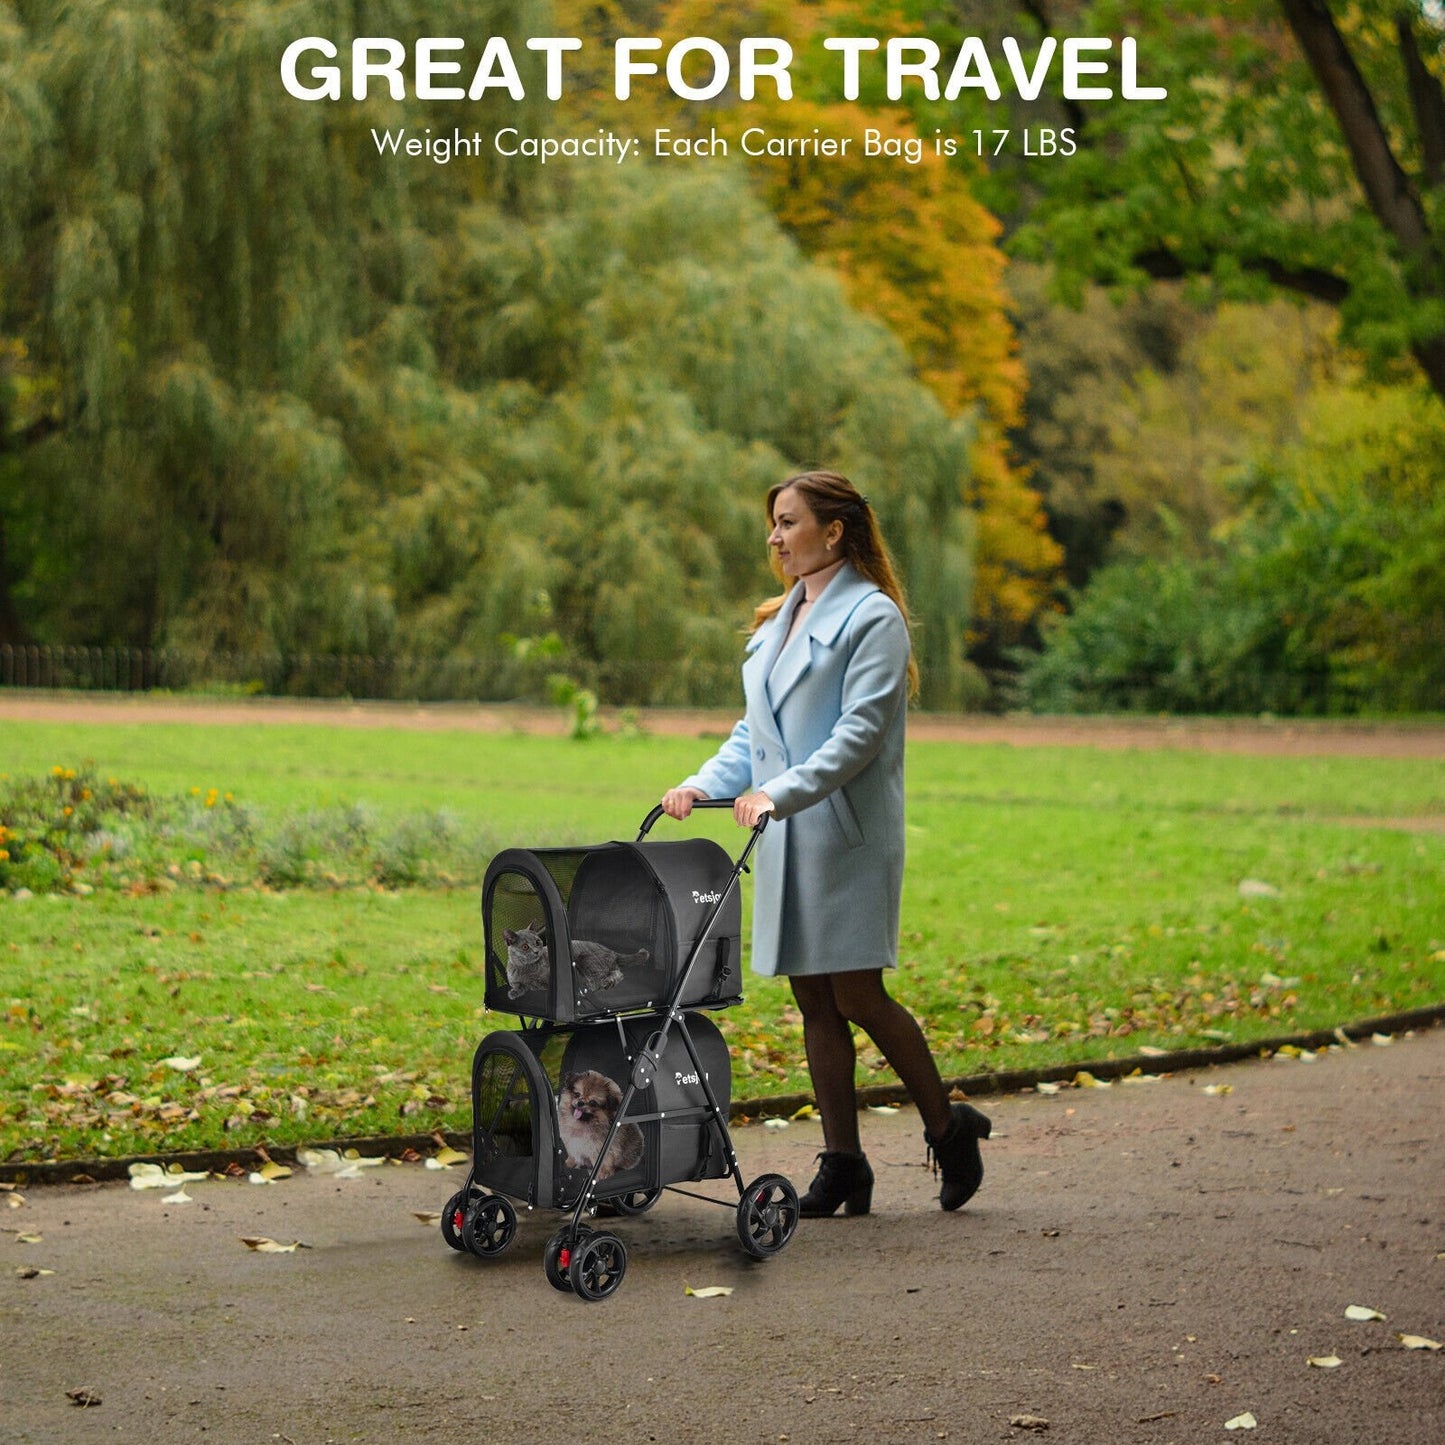 4-in-1 Double Pet Stroller with Detachable Carrier and Travel Carriage, Black